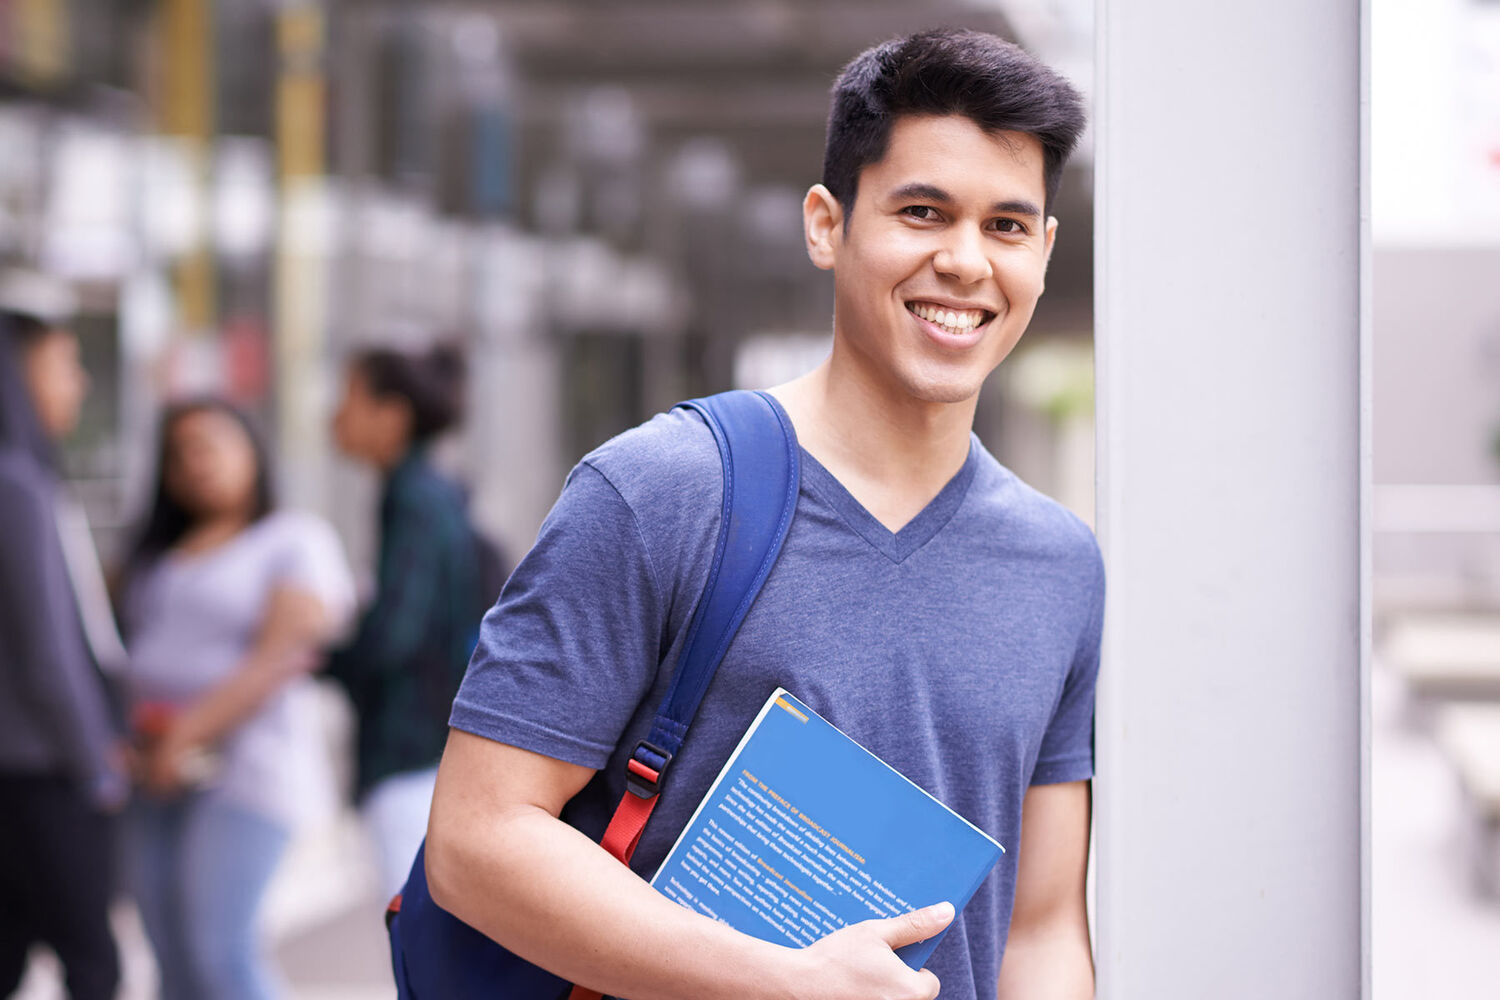 Young Man With Dark Hair In Blue Tshirt Wearing Backpack And Holding Textbook